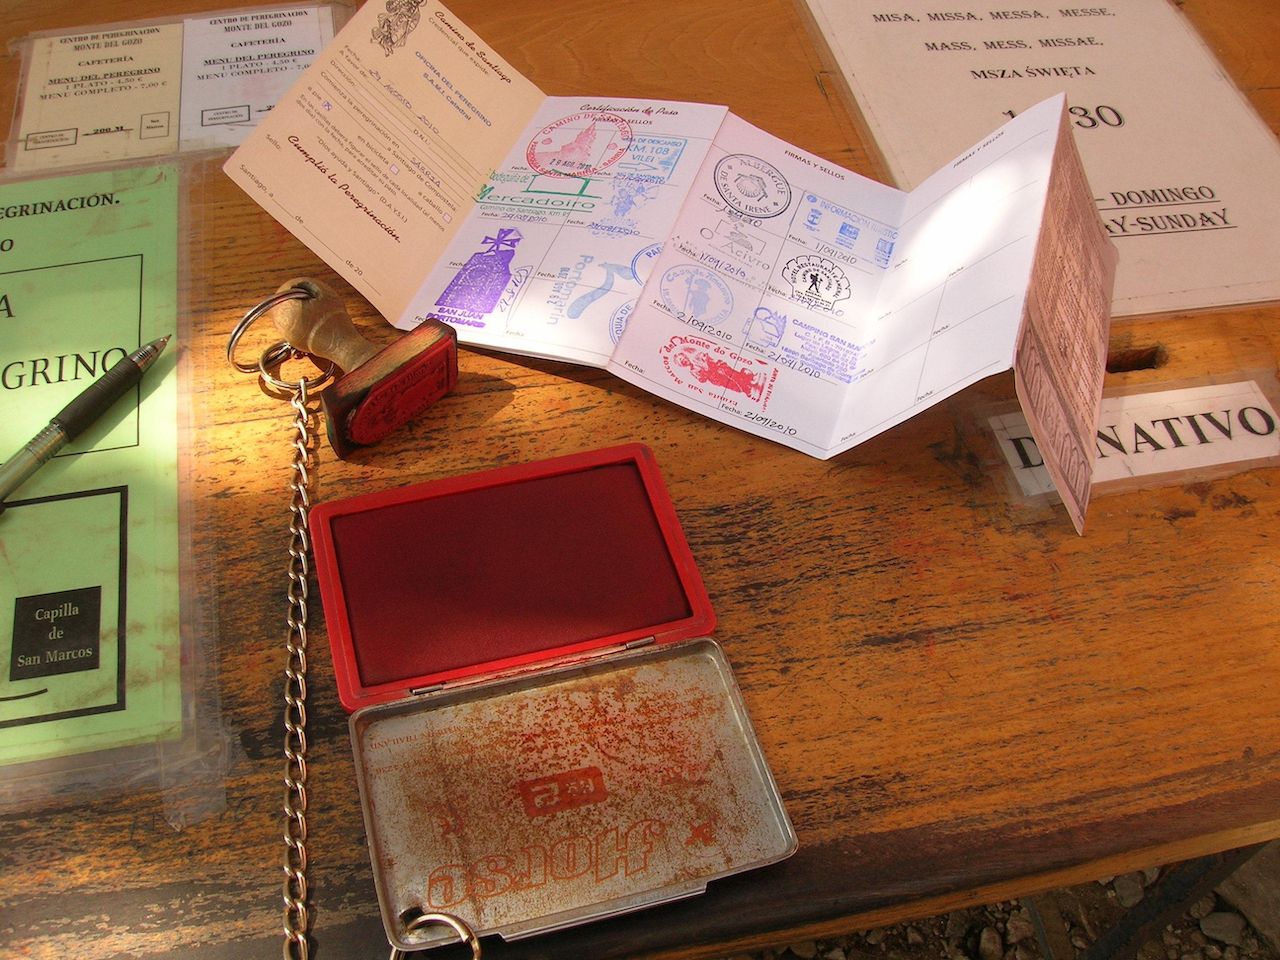 Pilgrim identification named Compostelana over a wooden table with stamp and red ink